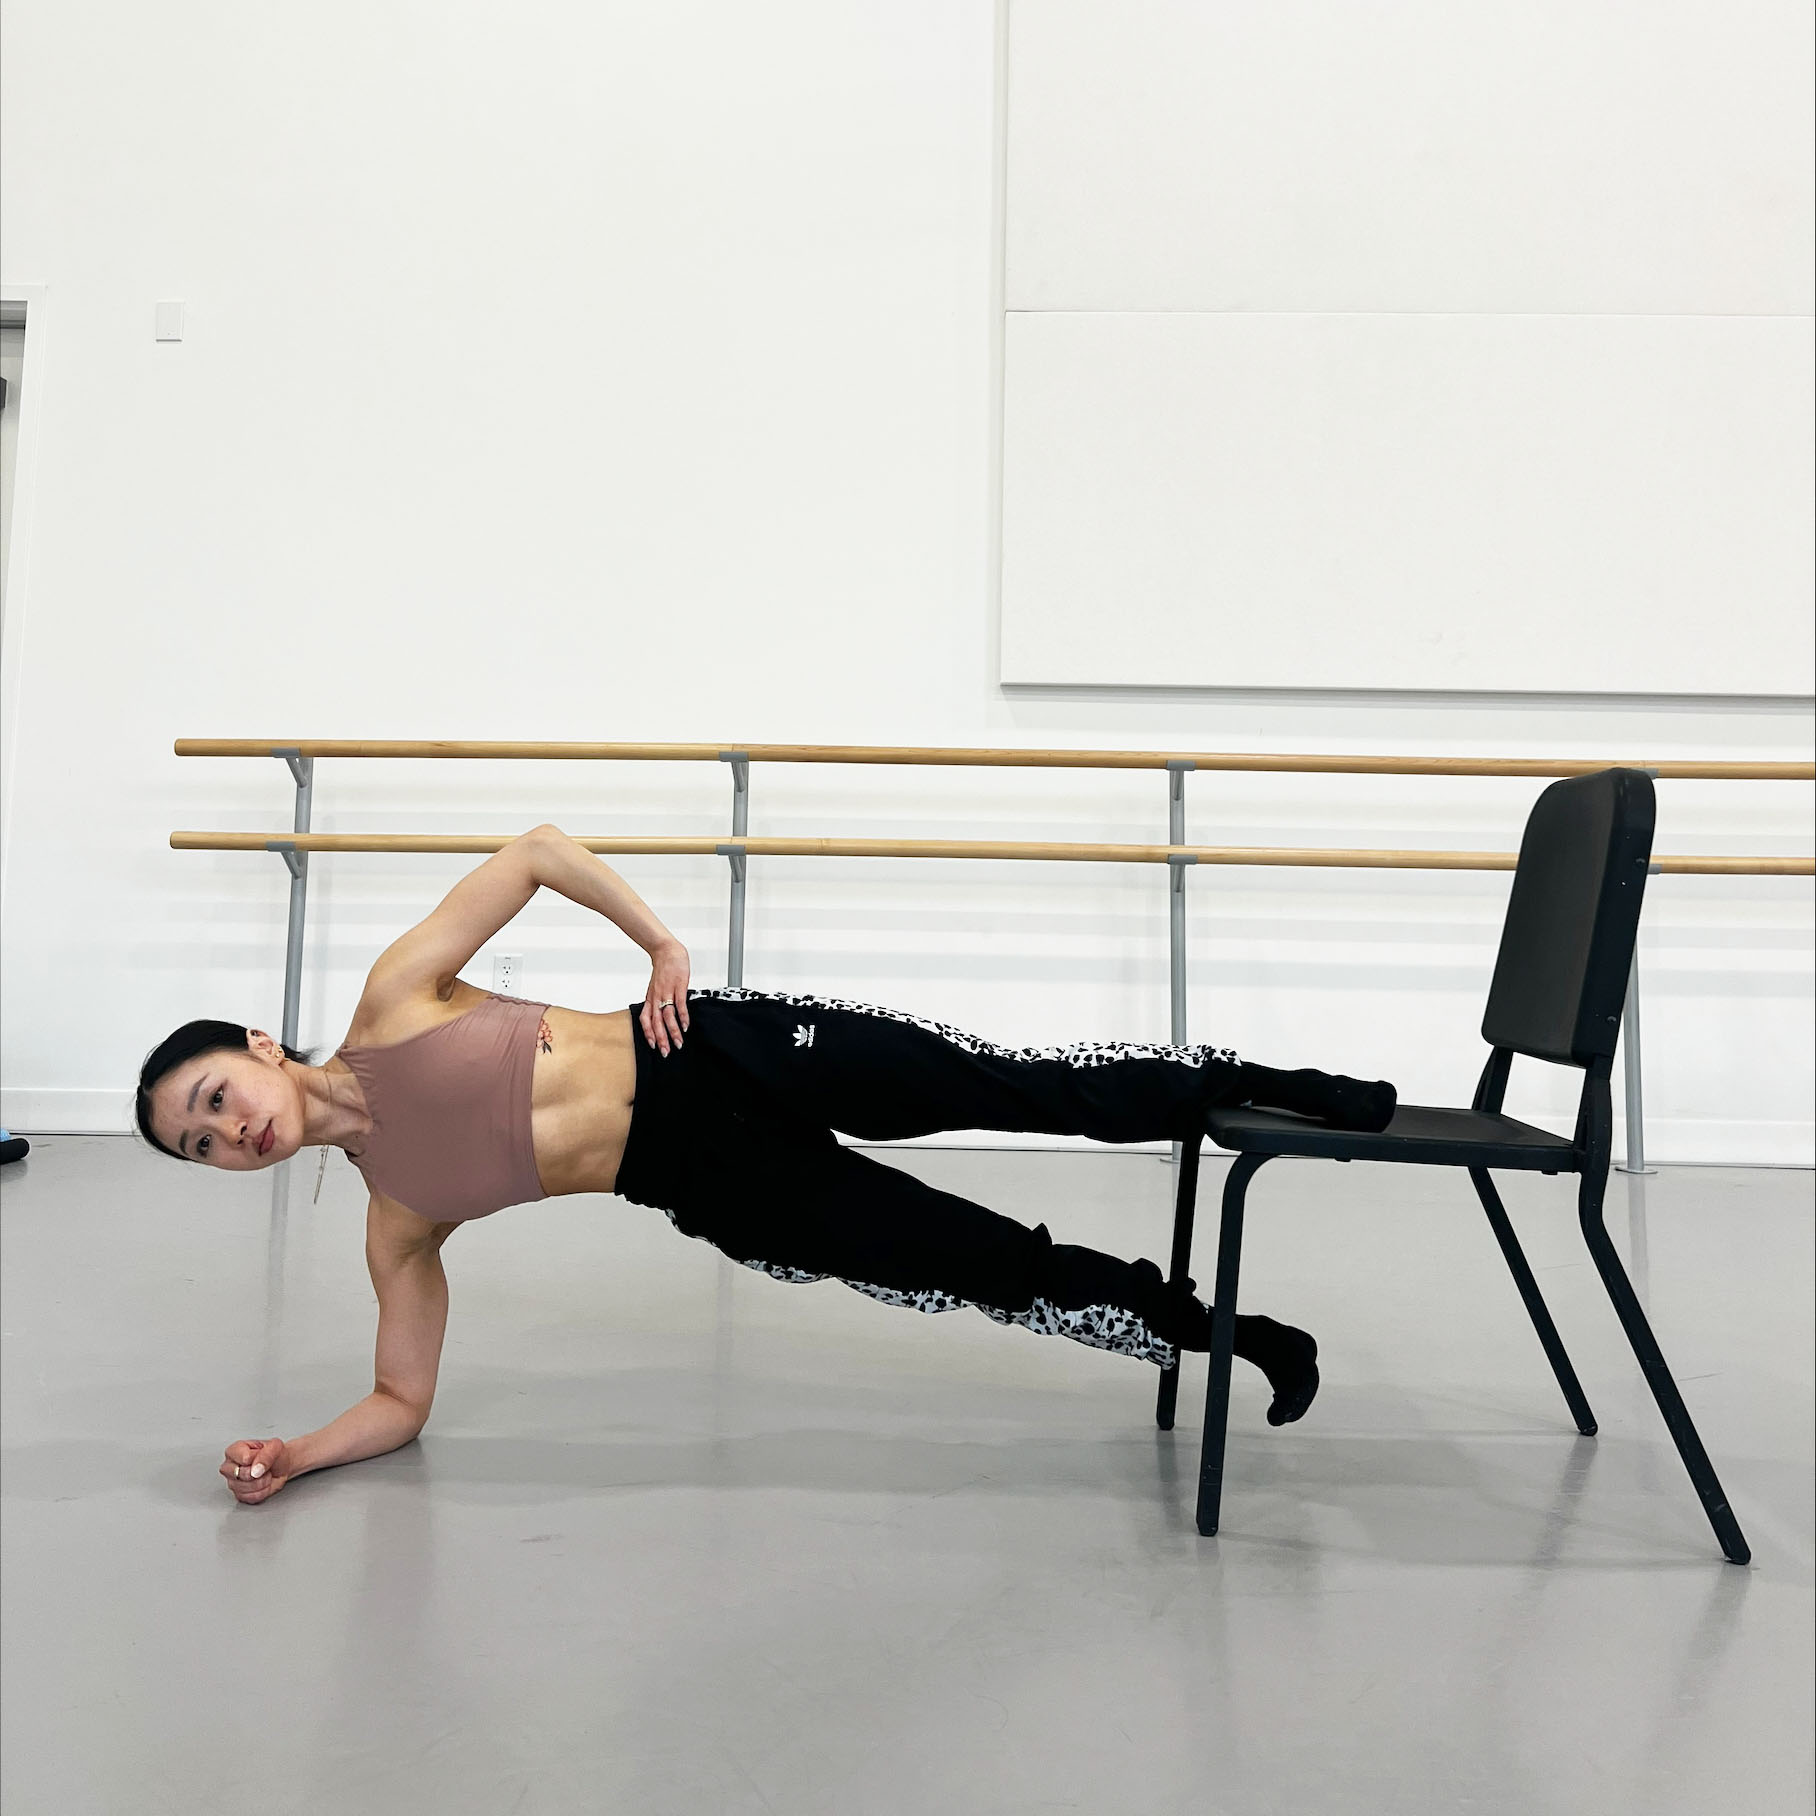 Minori Sakita, wearing a brown sports bra, black workout pants and black socks, balances in a plank on her right forearm with her left foot on the seat of a black chair. She lifts her straight right leg up towards the bottom of the chair's seat. flexing her foot.